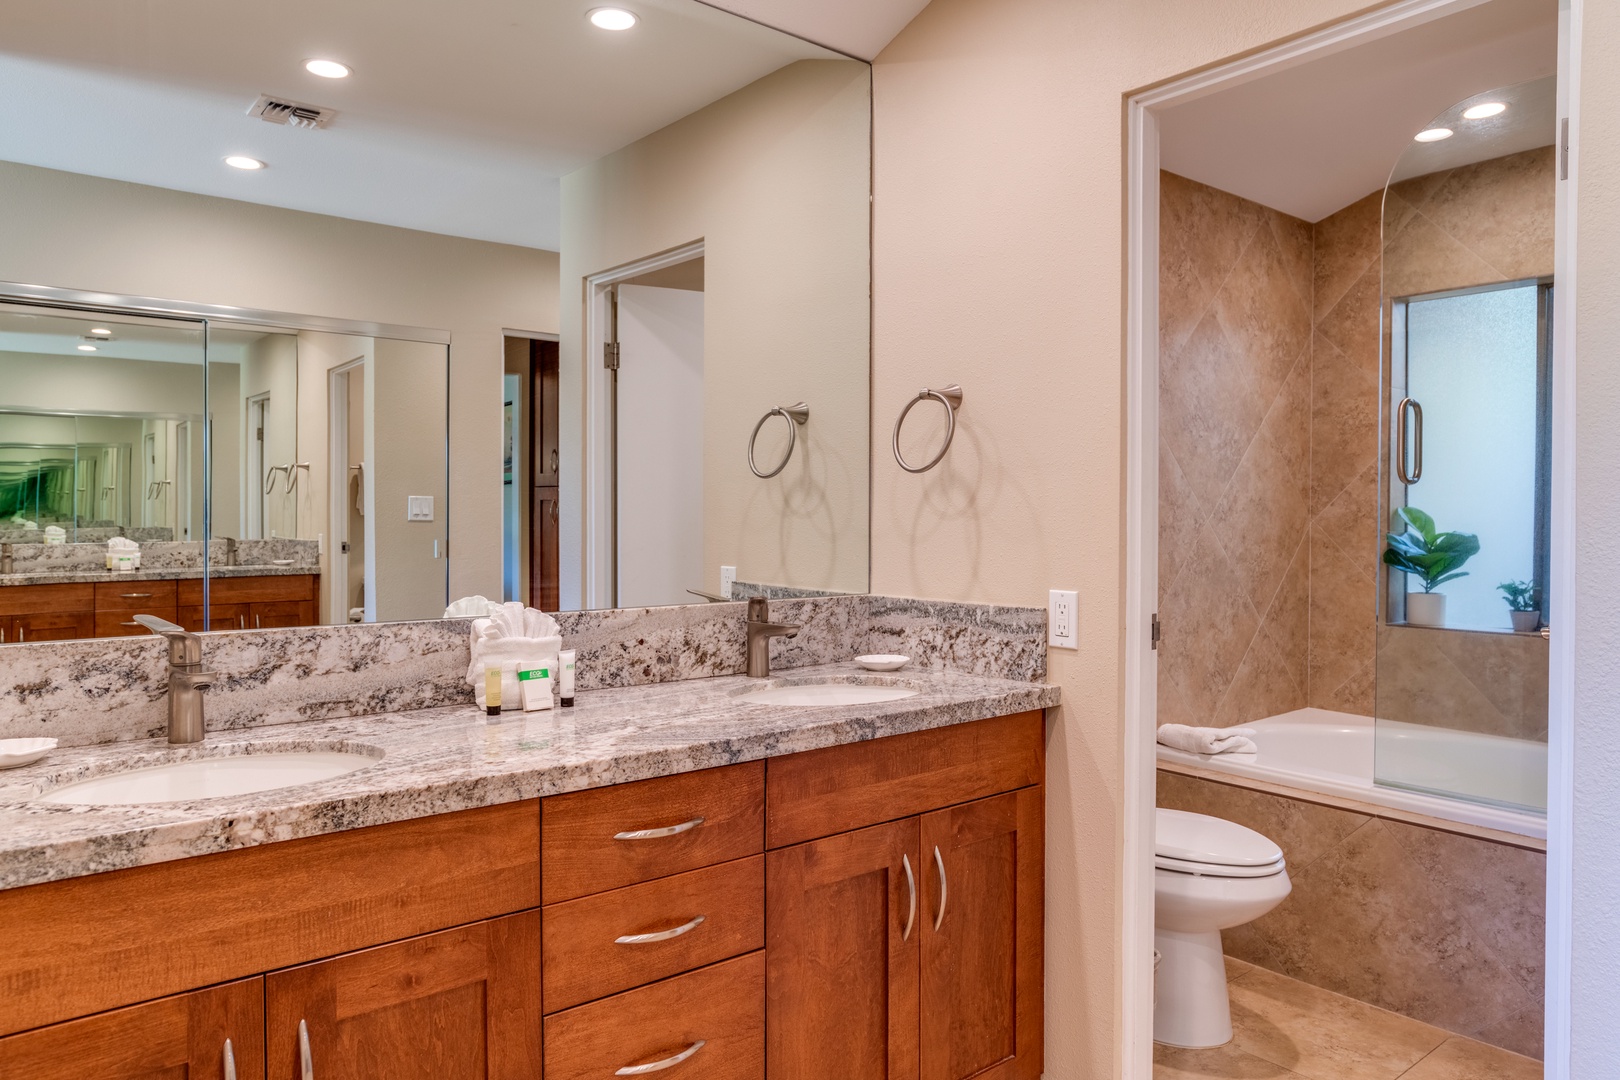 Lahaina Vacation Rentals, Kapalua Golf Villas 15P3-4 - Comes with a wide vanity area and a soaking tub